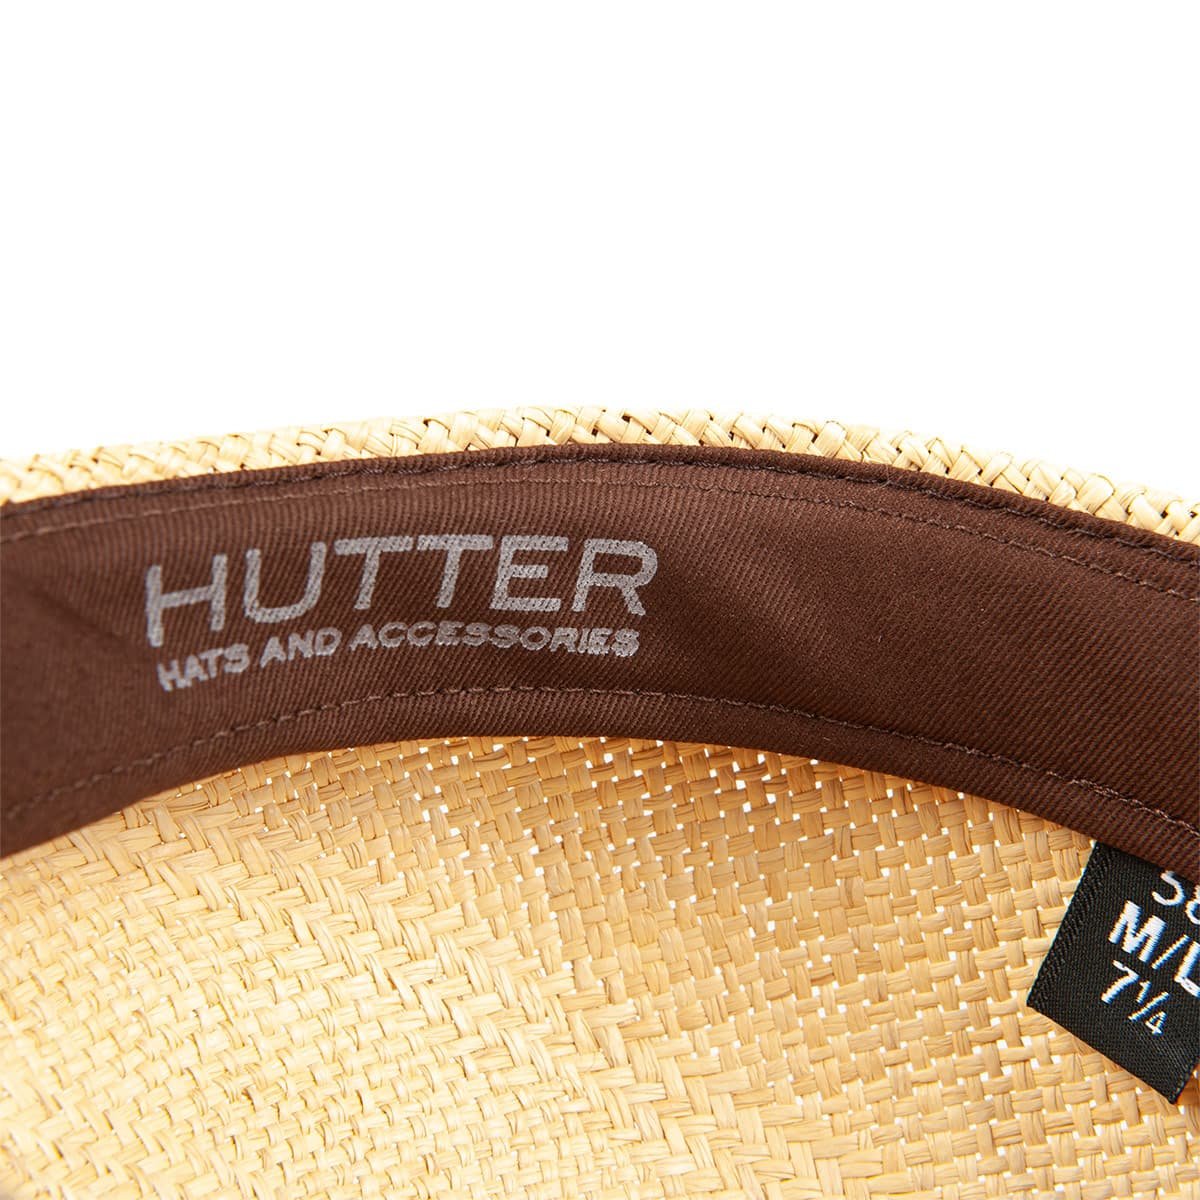 Straw cap by HUTTER